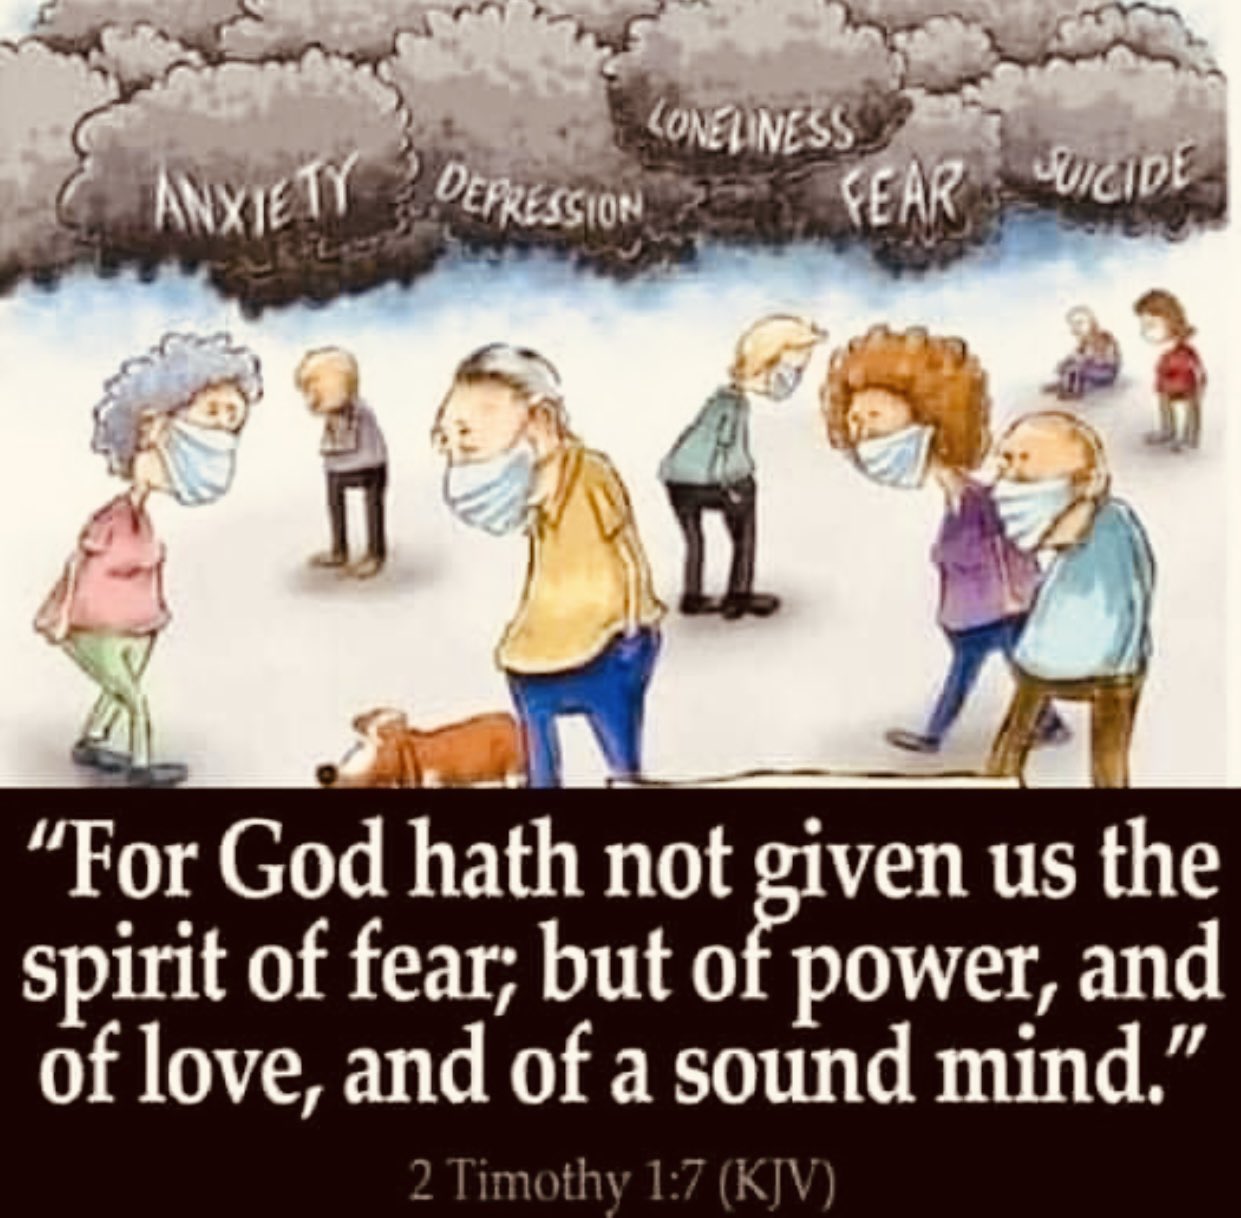 LONAWESS anxtety FEAR YvicIDE "For God hath not given us the spirit of but of power, and of and of a sound mind" 2 Timothy 1.7 (KJV) DErresSion fear; love,